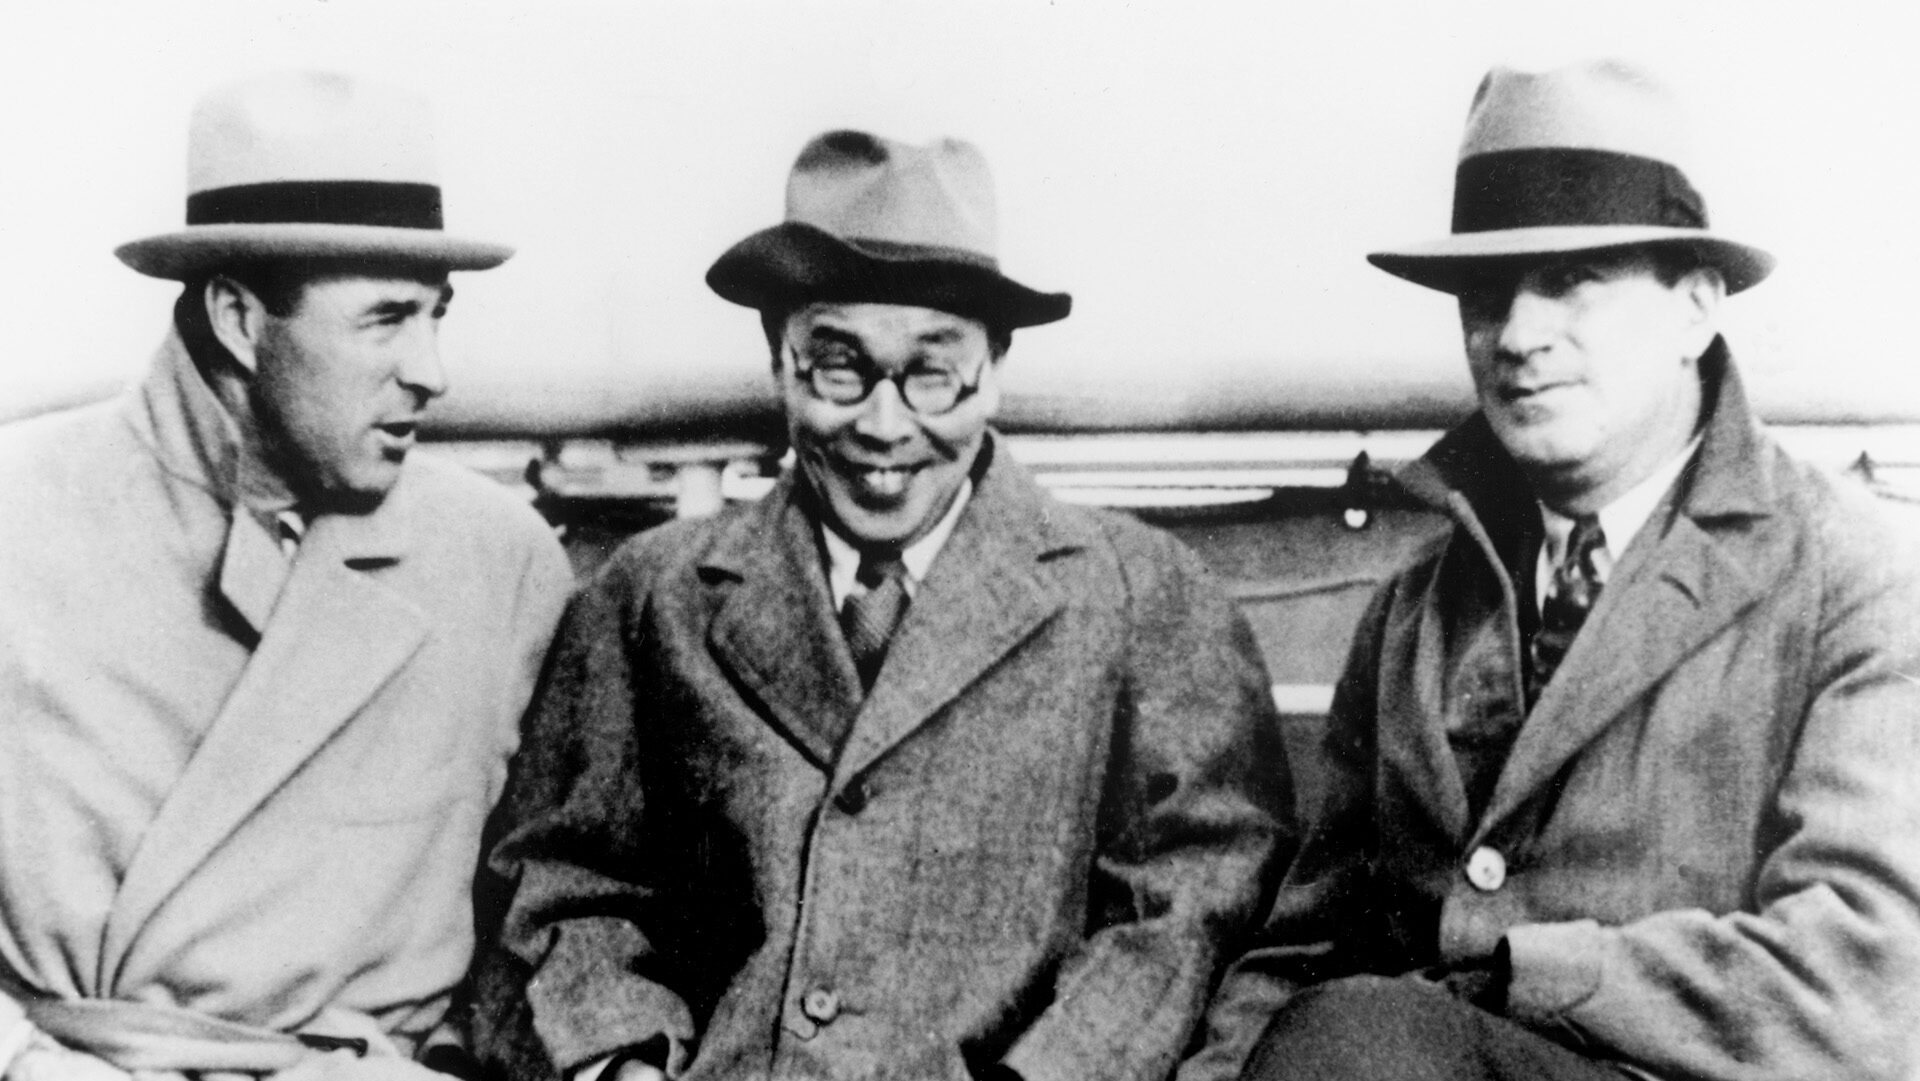 Moe Berg (right) during his 1932 visit to Japan, pictured with fellow baseball instructor Lefty O’Doul and host Sataro Suzuki.